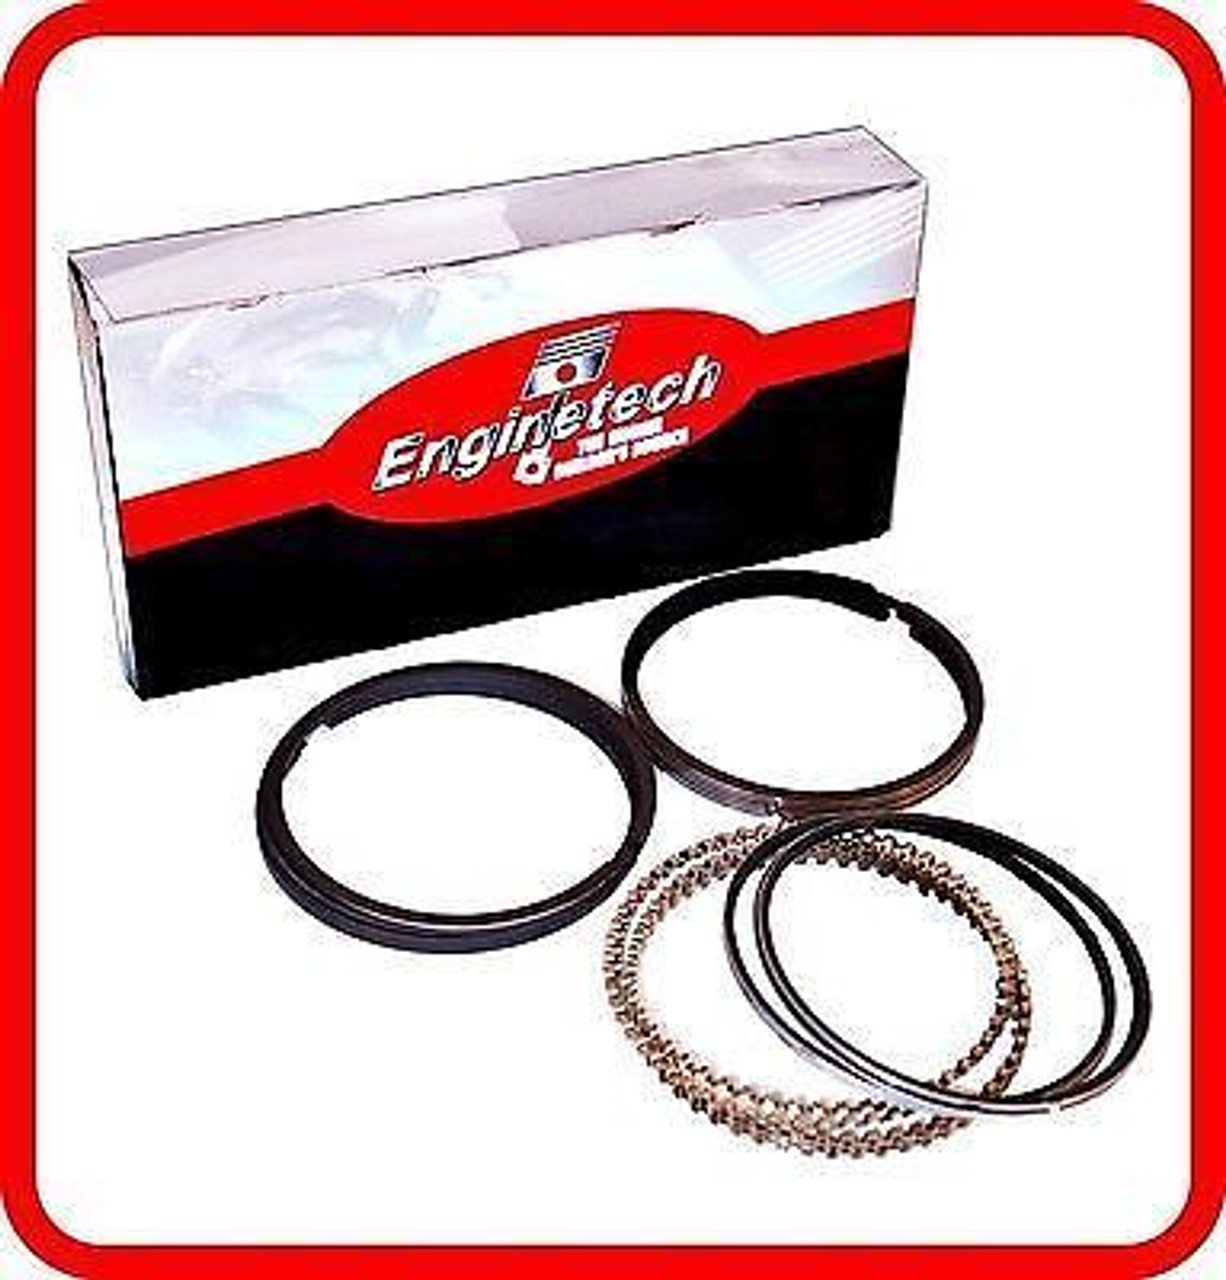 1992 Cadillac Commercial Chassis 4.9L Engine Piston Ring Set M92138 -50